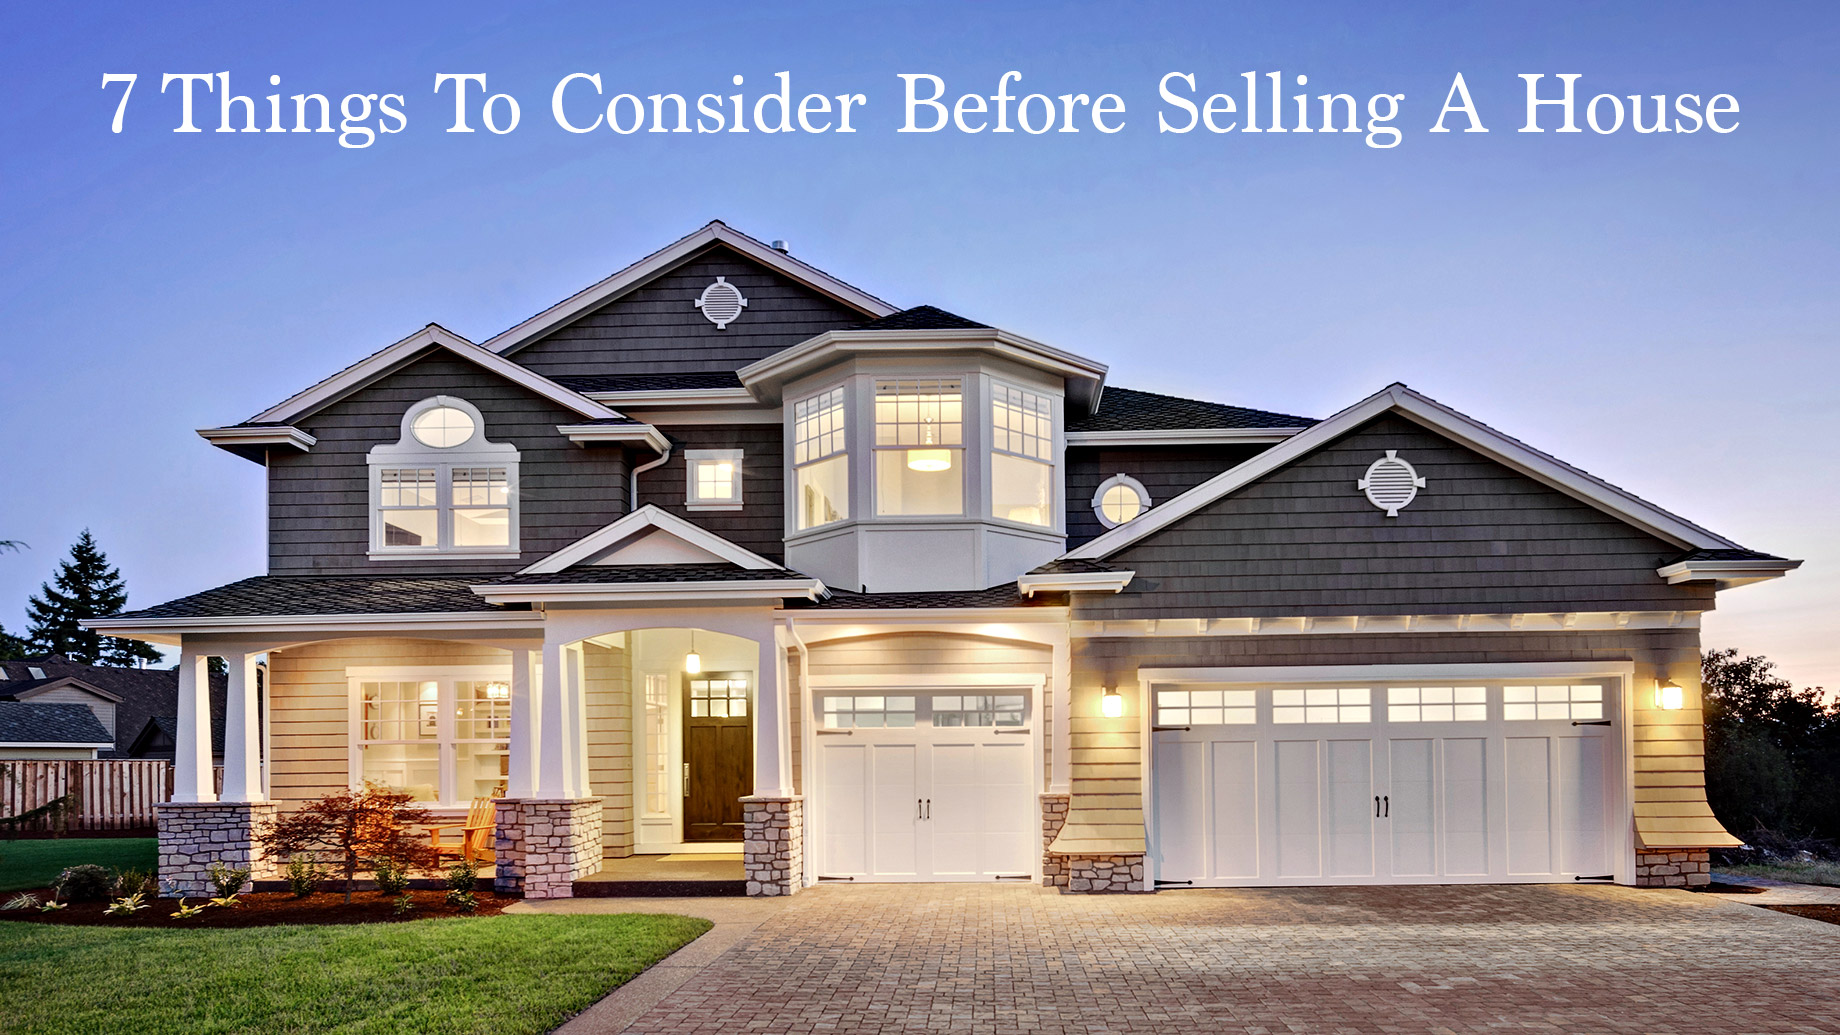 7 Things To Consider Before Selling A House